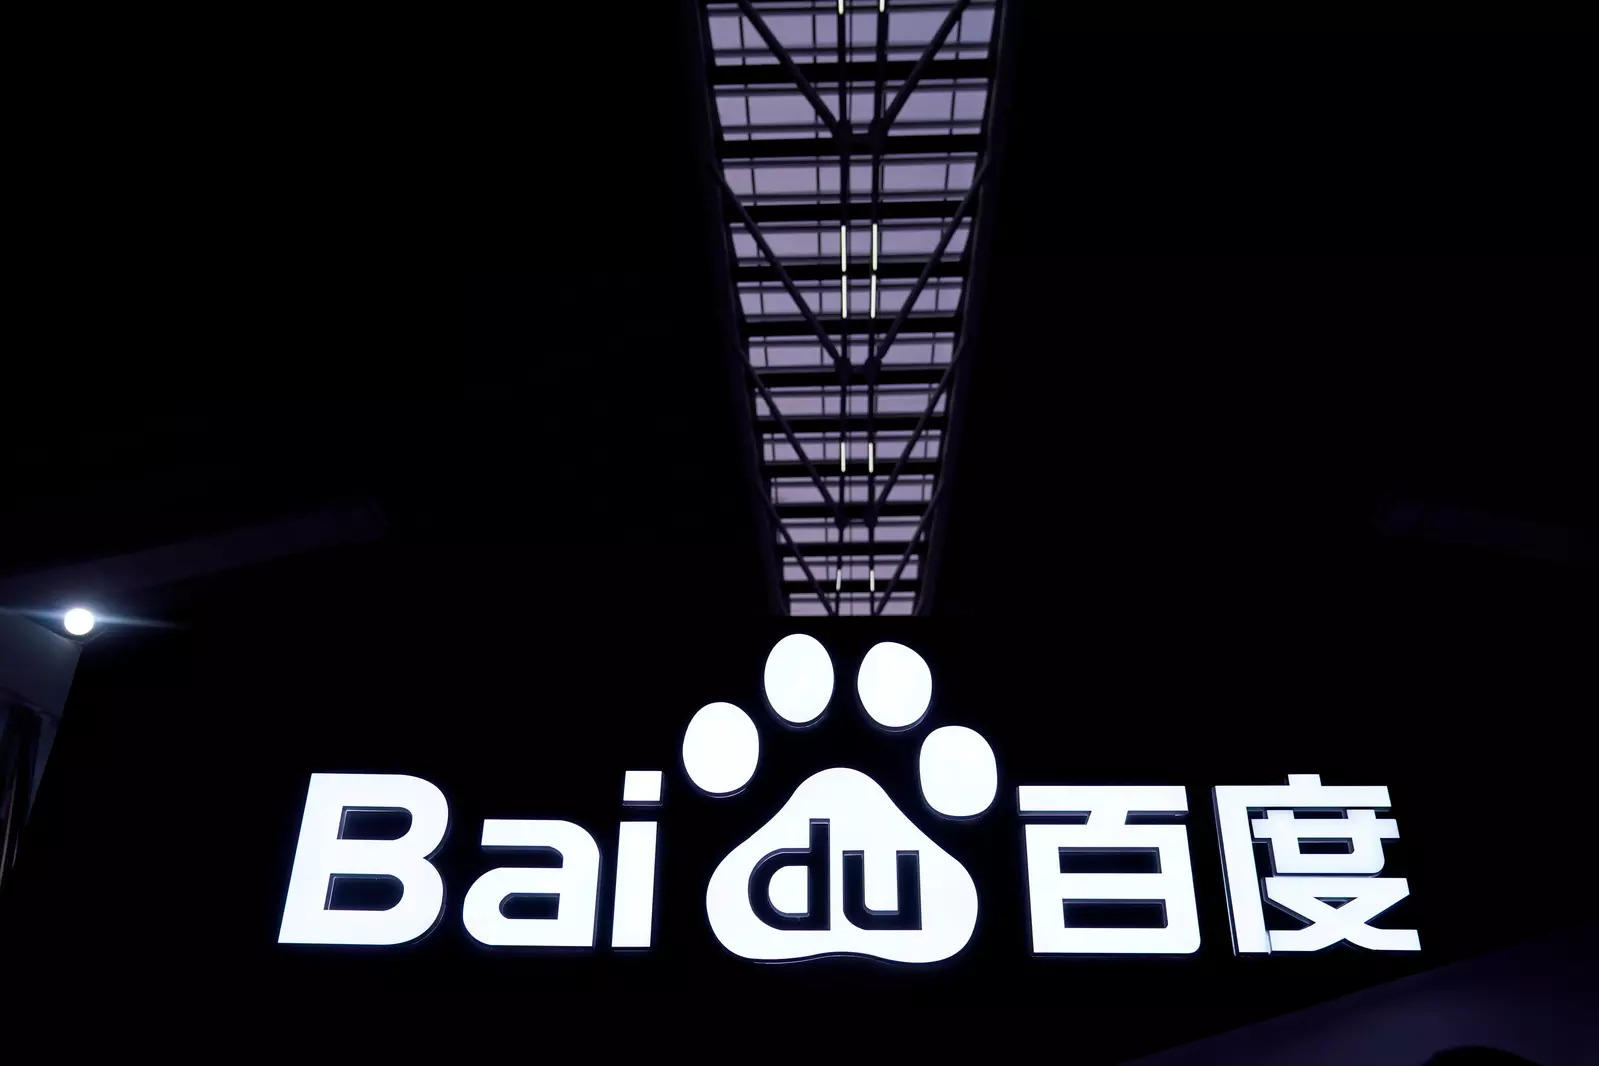 China's Baidu closes flat on debut as investors wary of fundraising spree in city